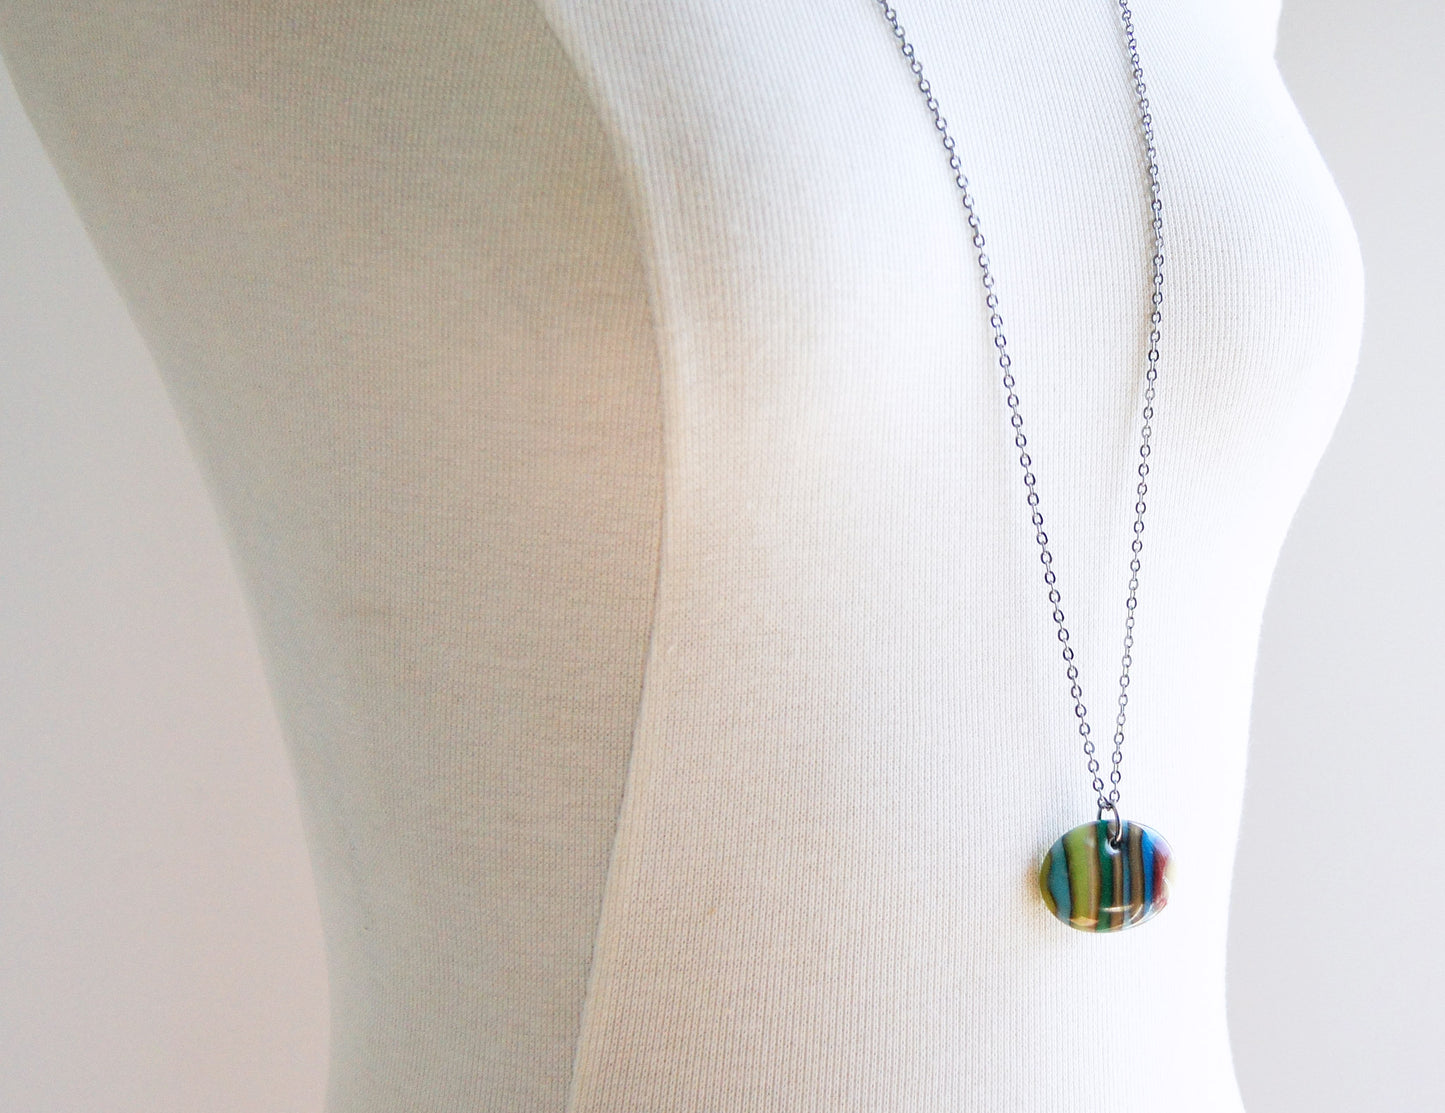 36" long pendant necklace handmade in glass